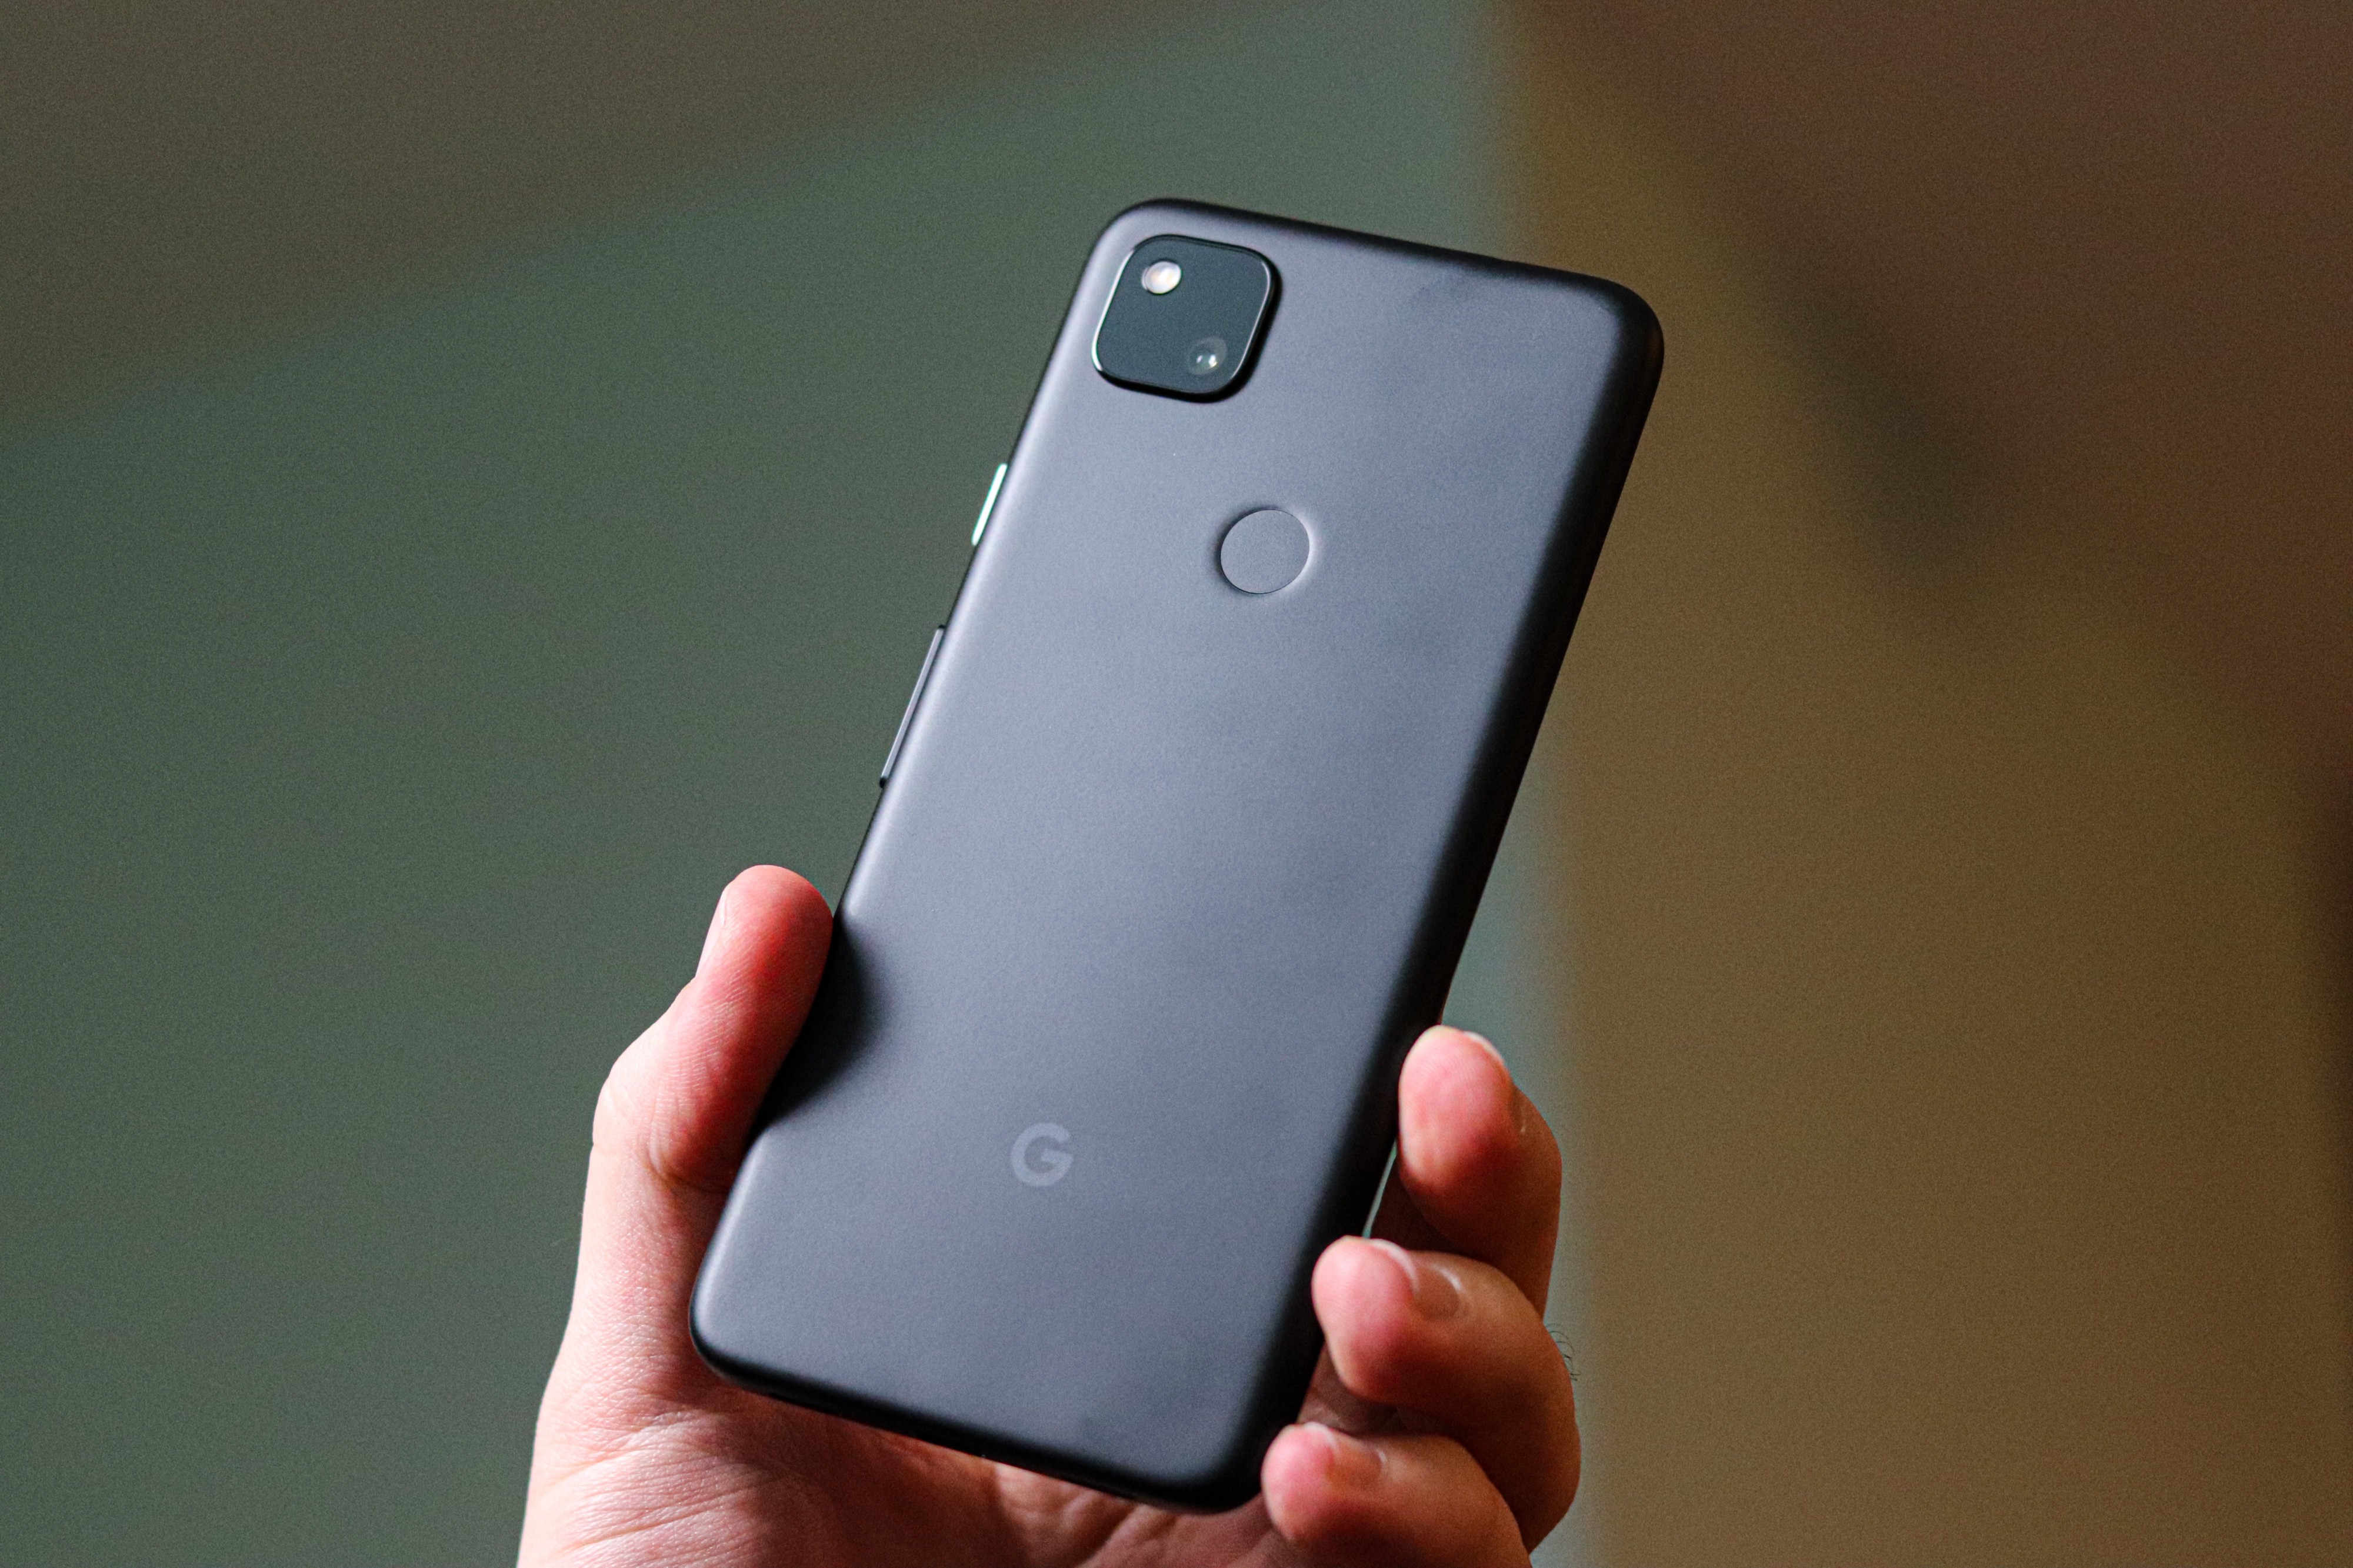 1GU98LGifbyxiquPztFHl w - Google Pixel 4a price in Nigeria, review, and full specs